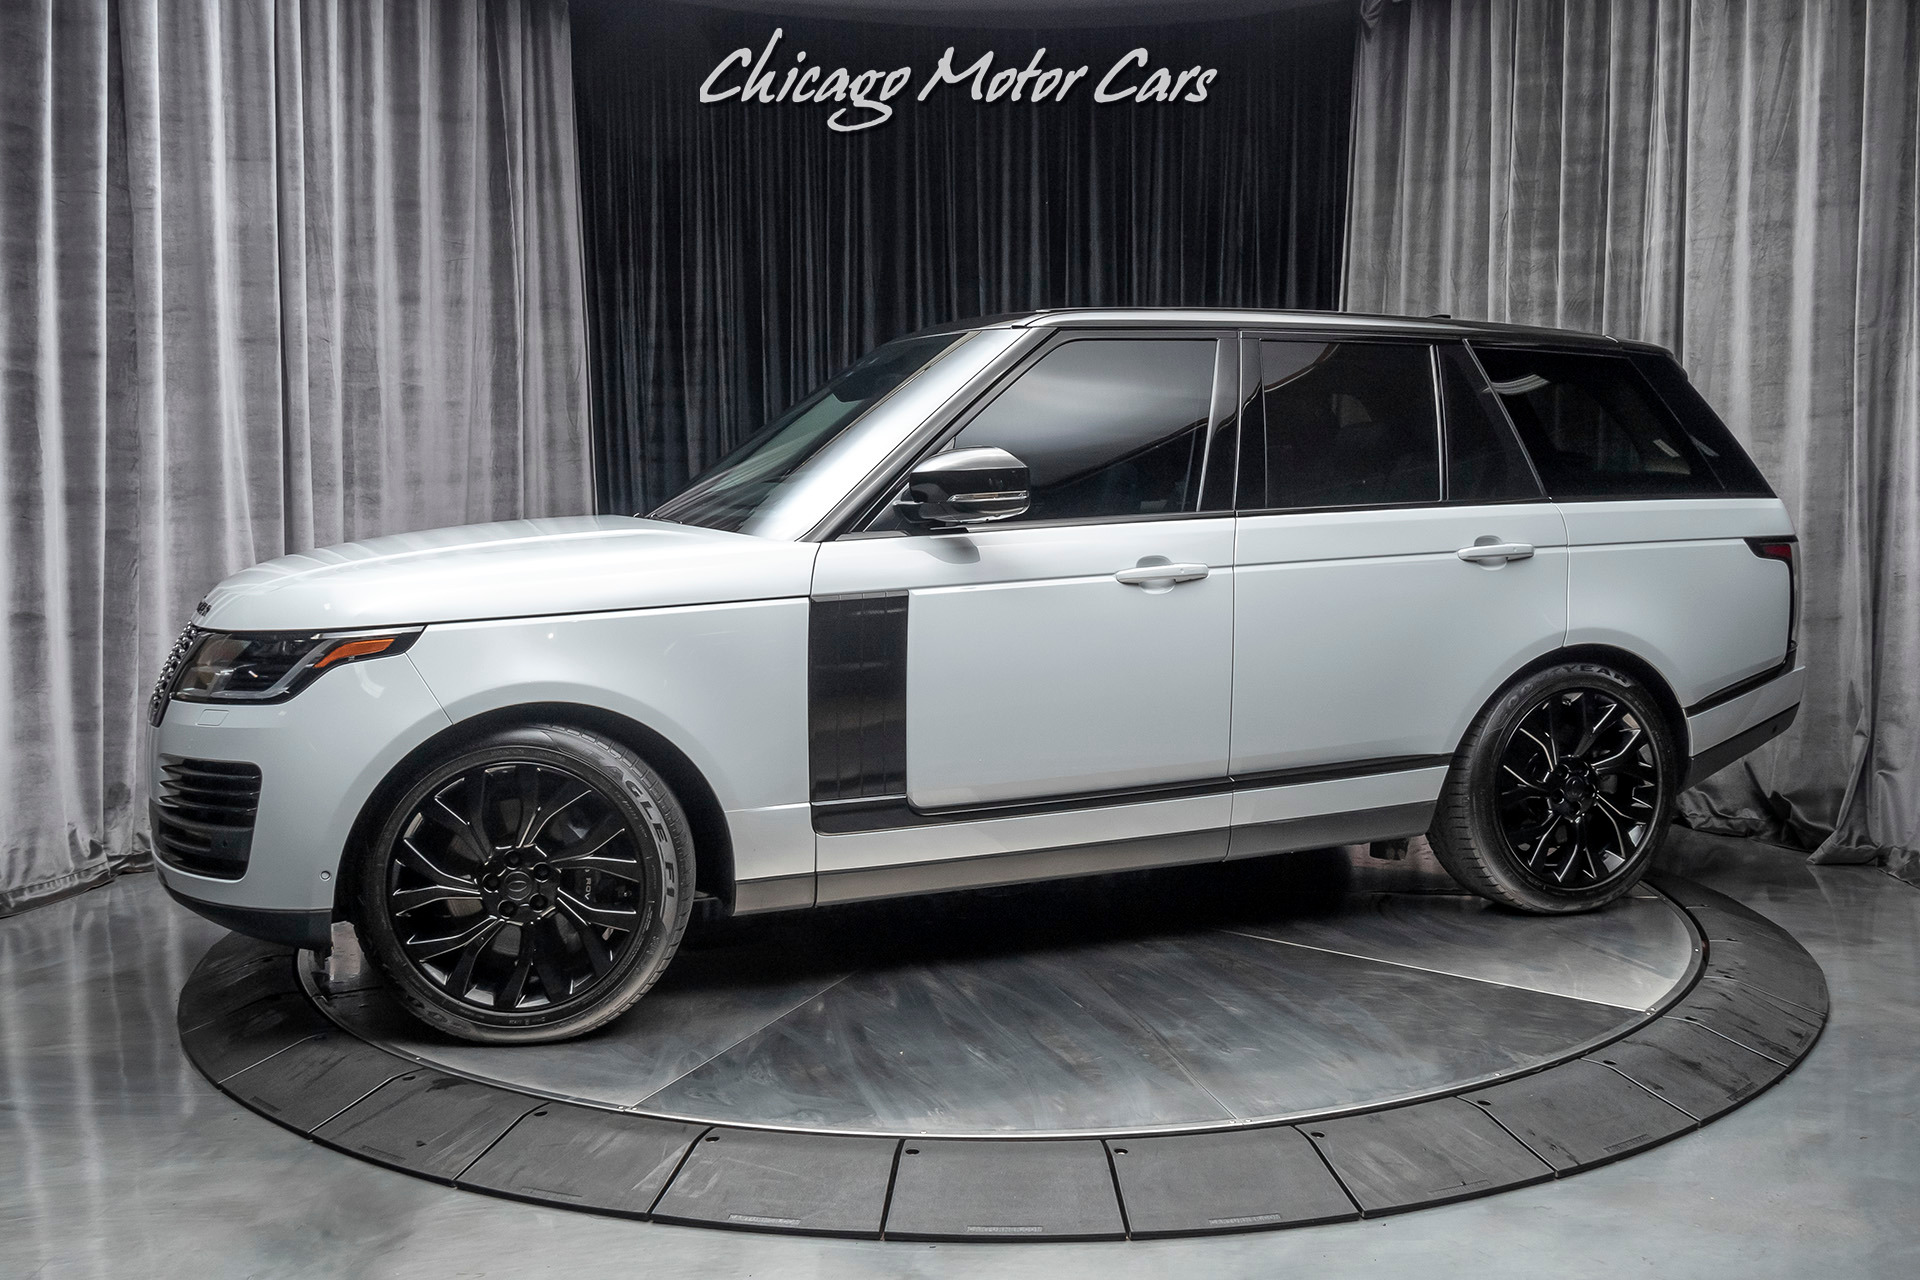 Fractie Whitney Hen Used 2018 Land Rover Range Rover Supercharged V8 HSE SUV $117K MSRP For  Sale (Special Pricing) | Chicago Motor Cars Stock #17488A